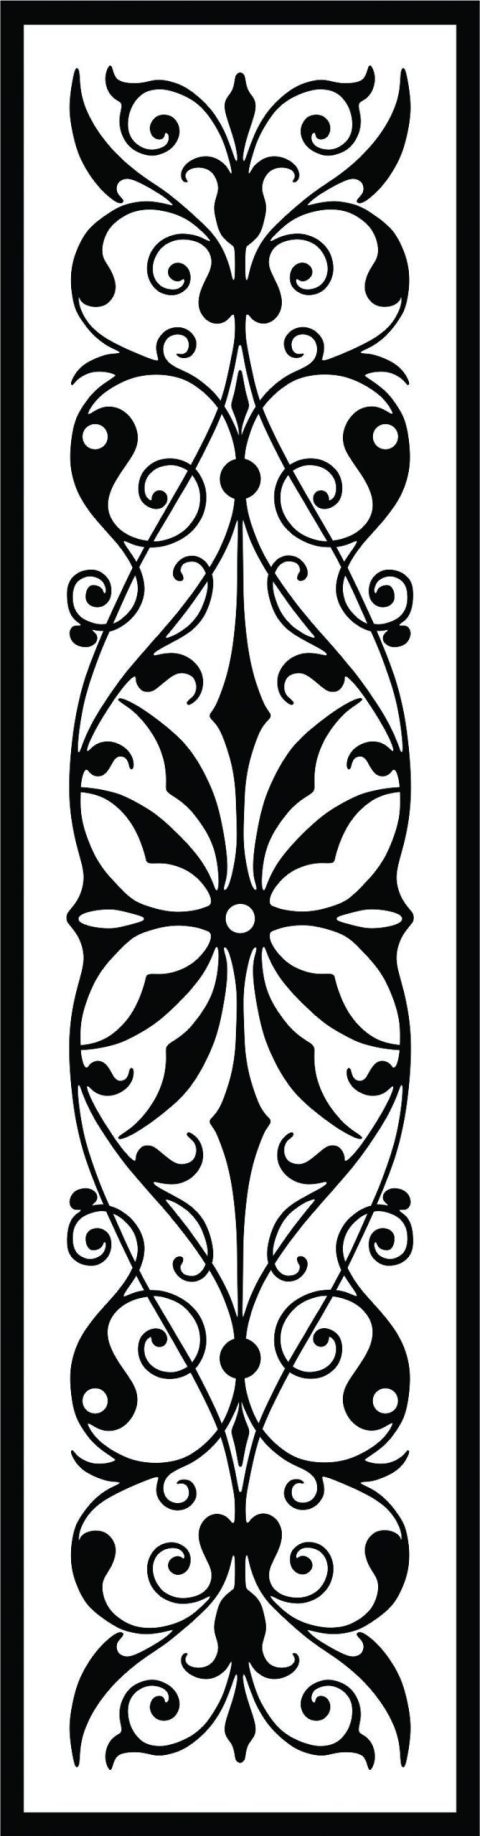 Decorative Screen Patterns For Laser Cutting 36 Free DXF File